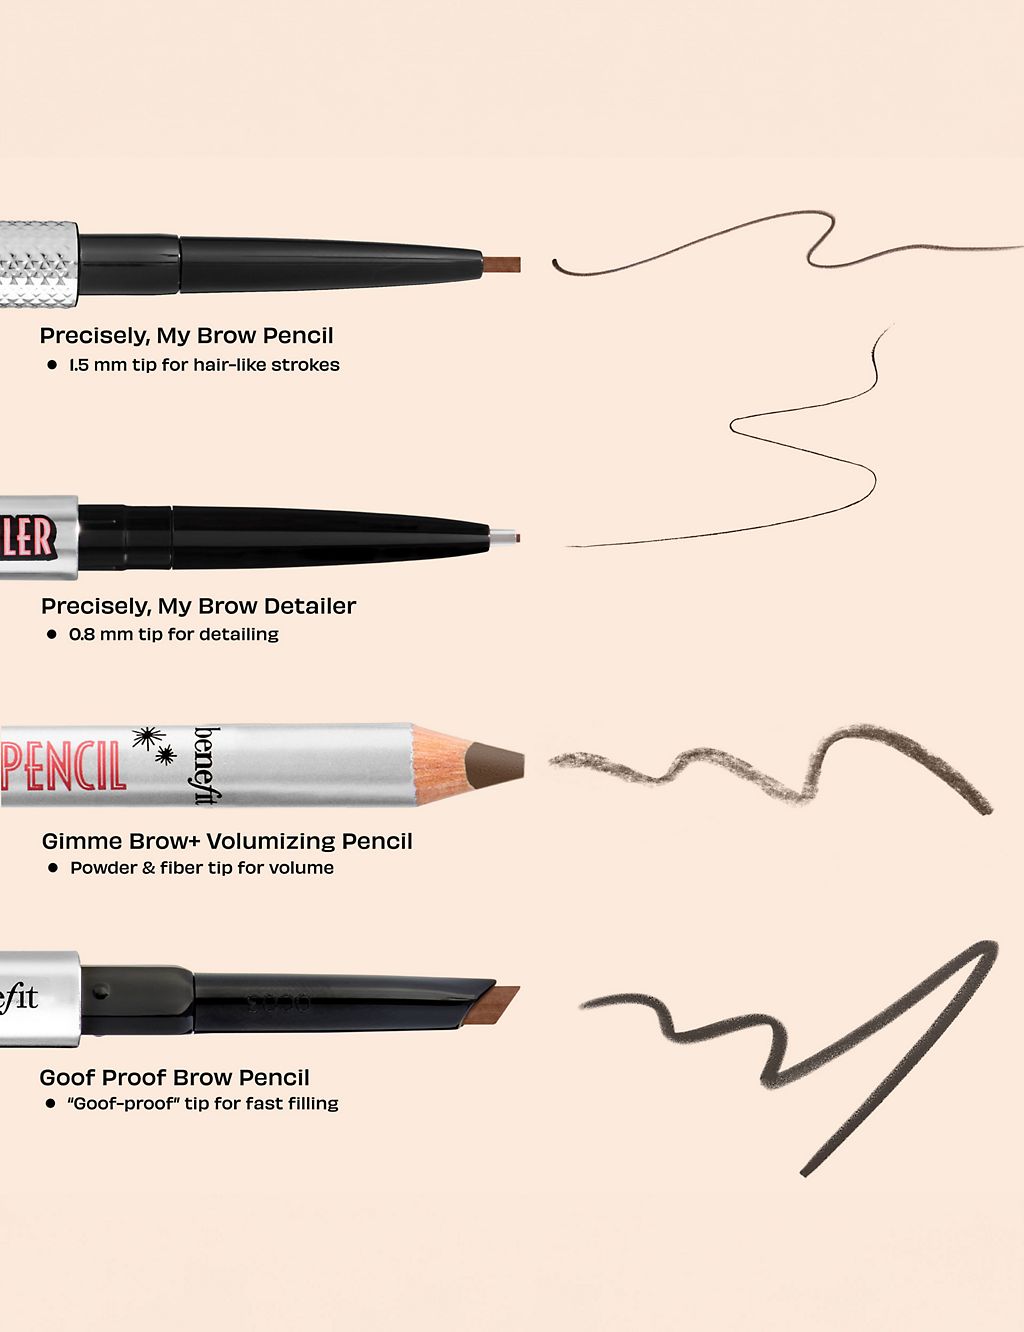 Precisely My Brow Detailer Pencil 4 of 5